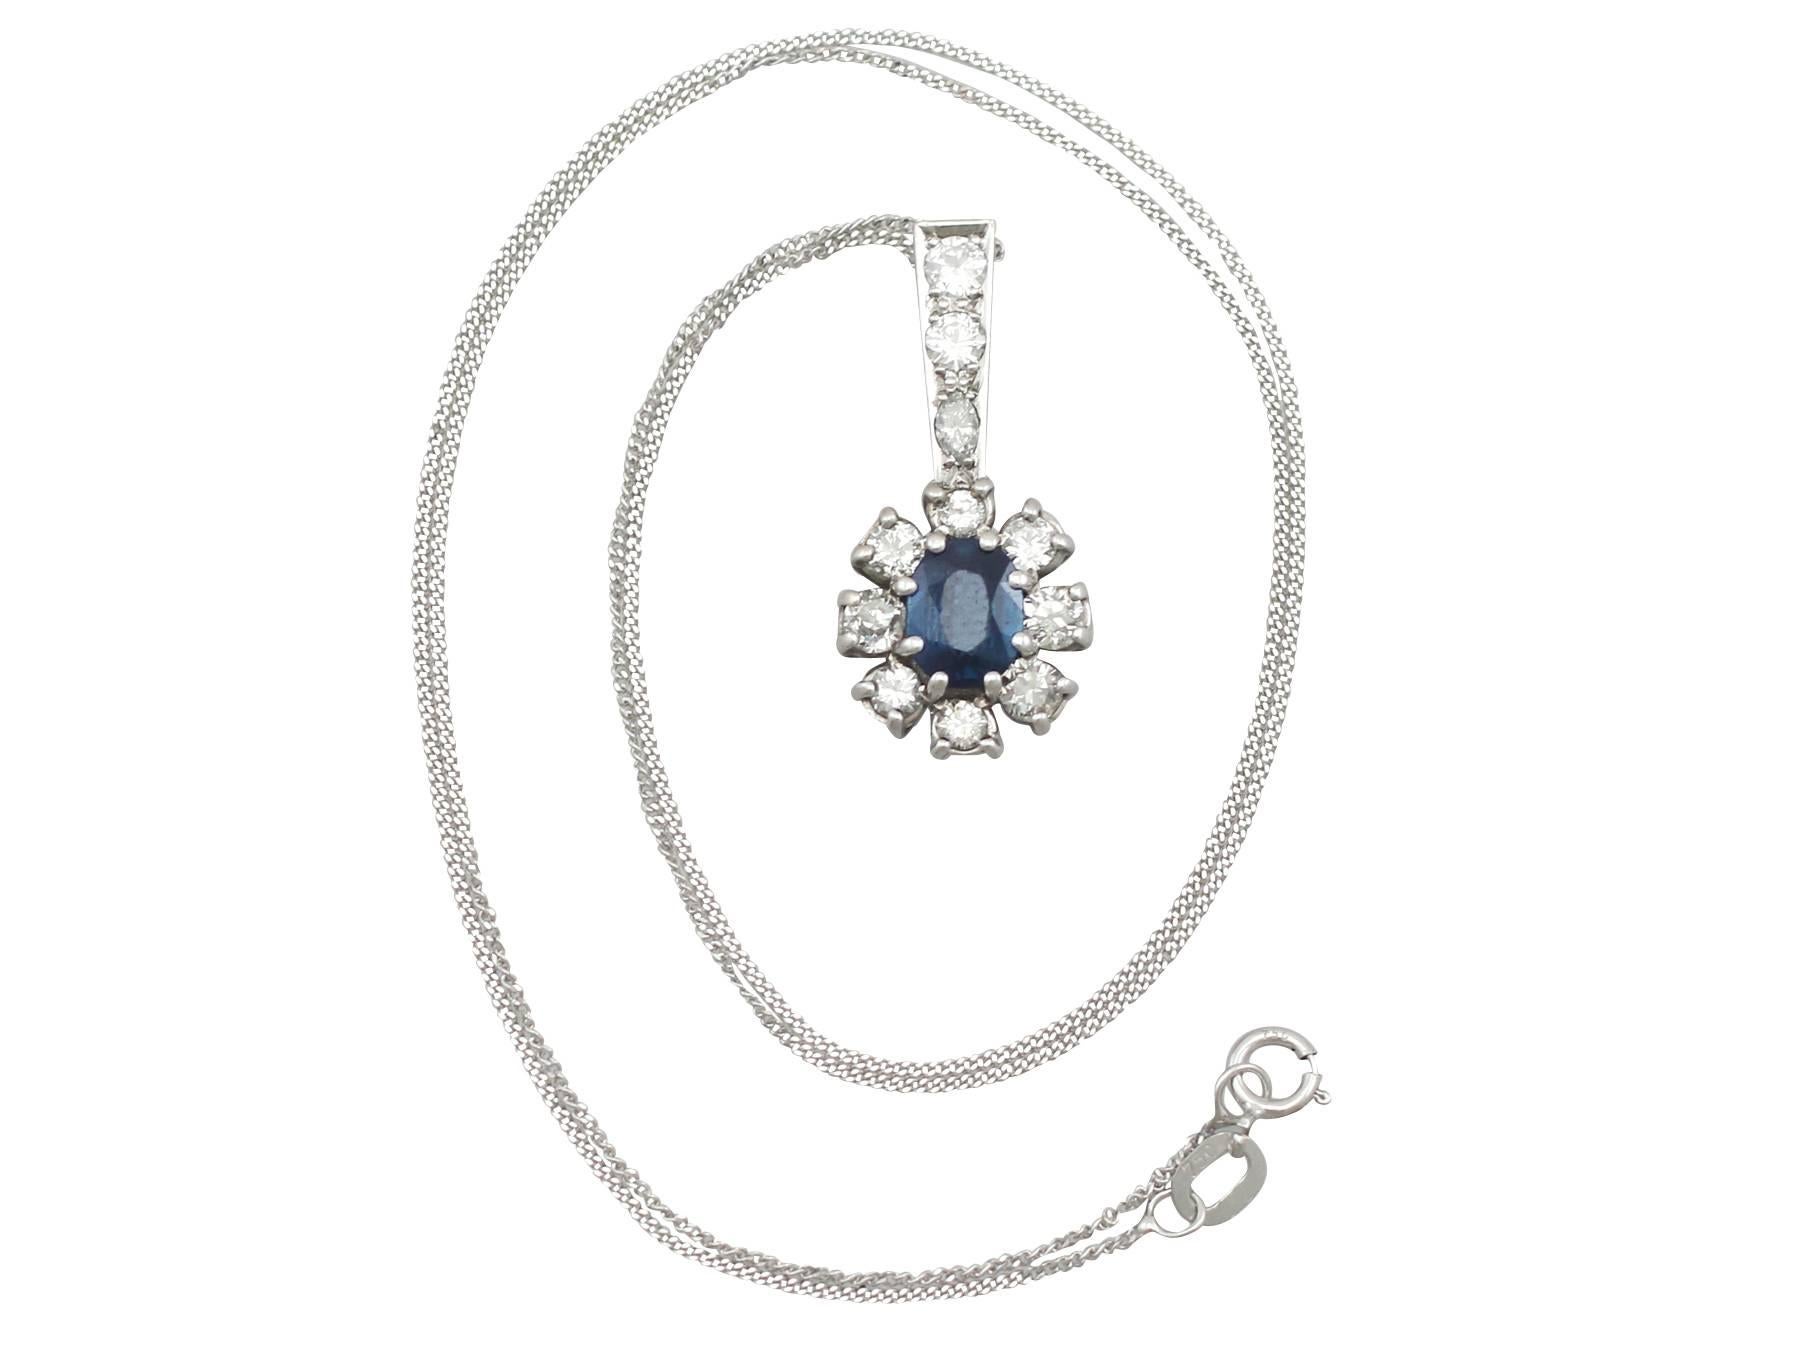 An impressive vintage 1.02 carat blue sapphire and 0.86 carat diamond, 18 karat white gold cluster pendant; part of our diverse vintage jewelry and estate jewelry collections

This fine and impressive sapphire cluster pendant has been crafted in 18k